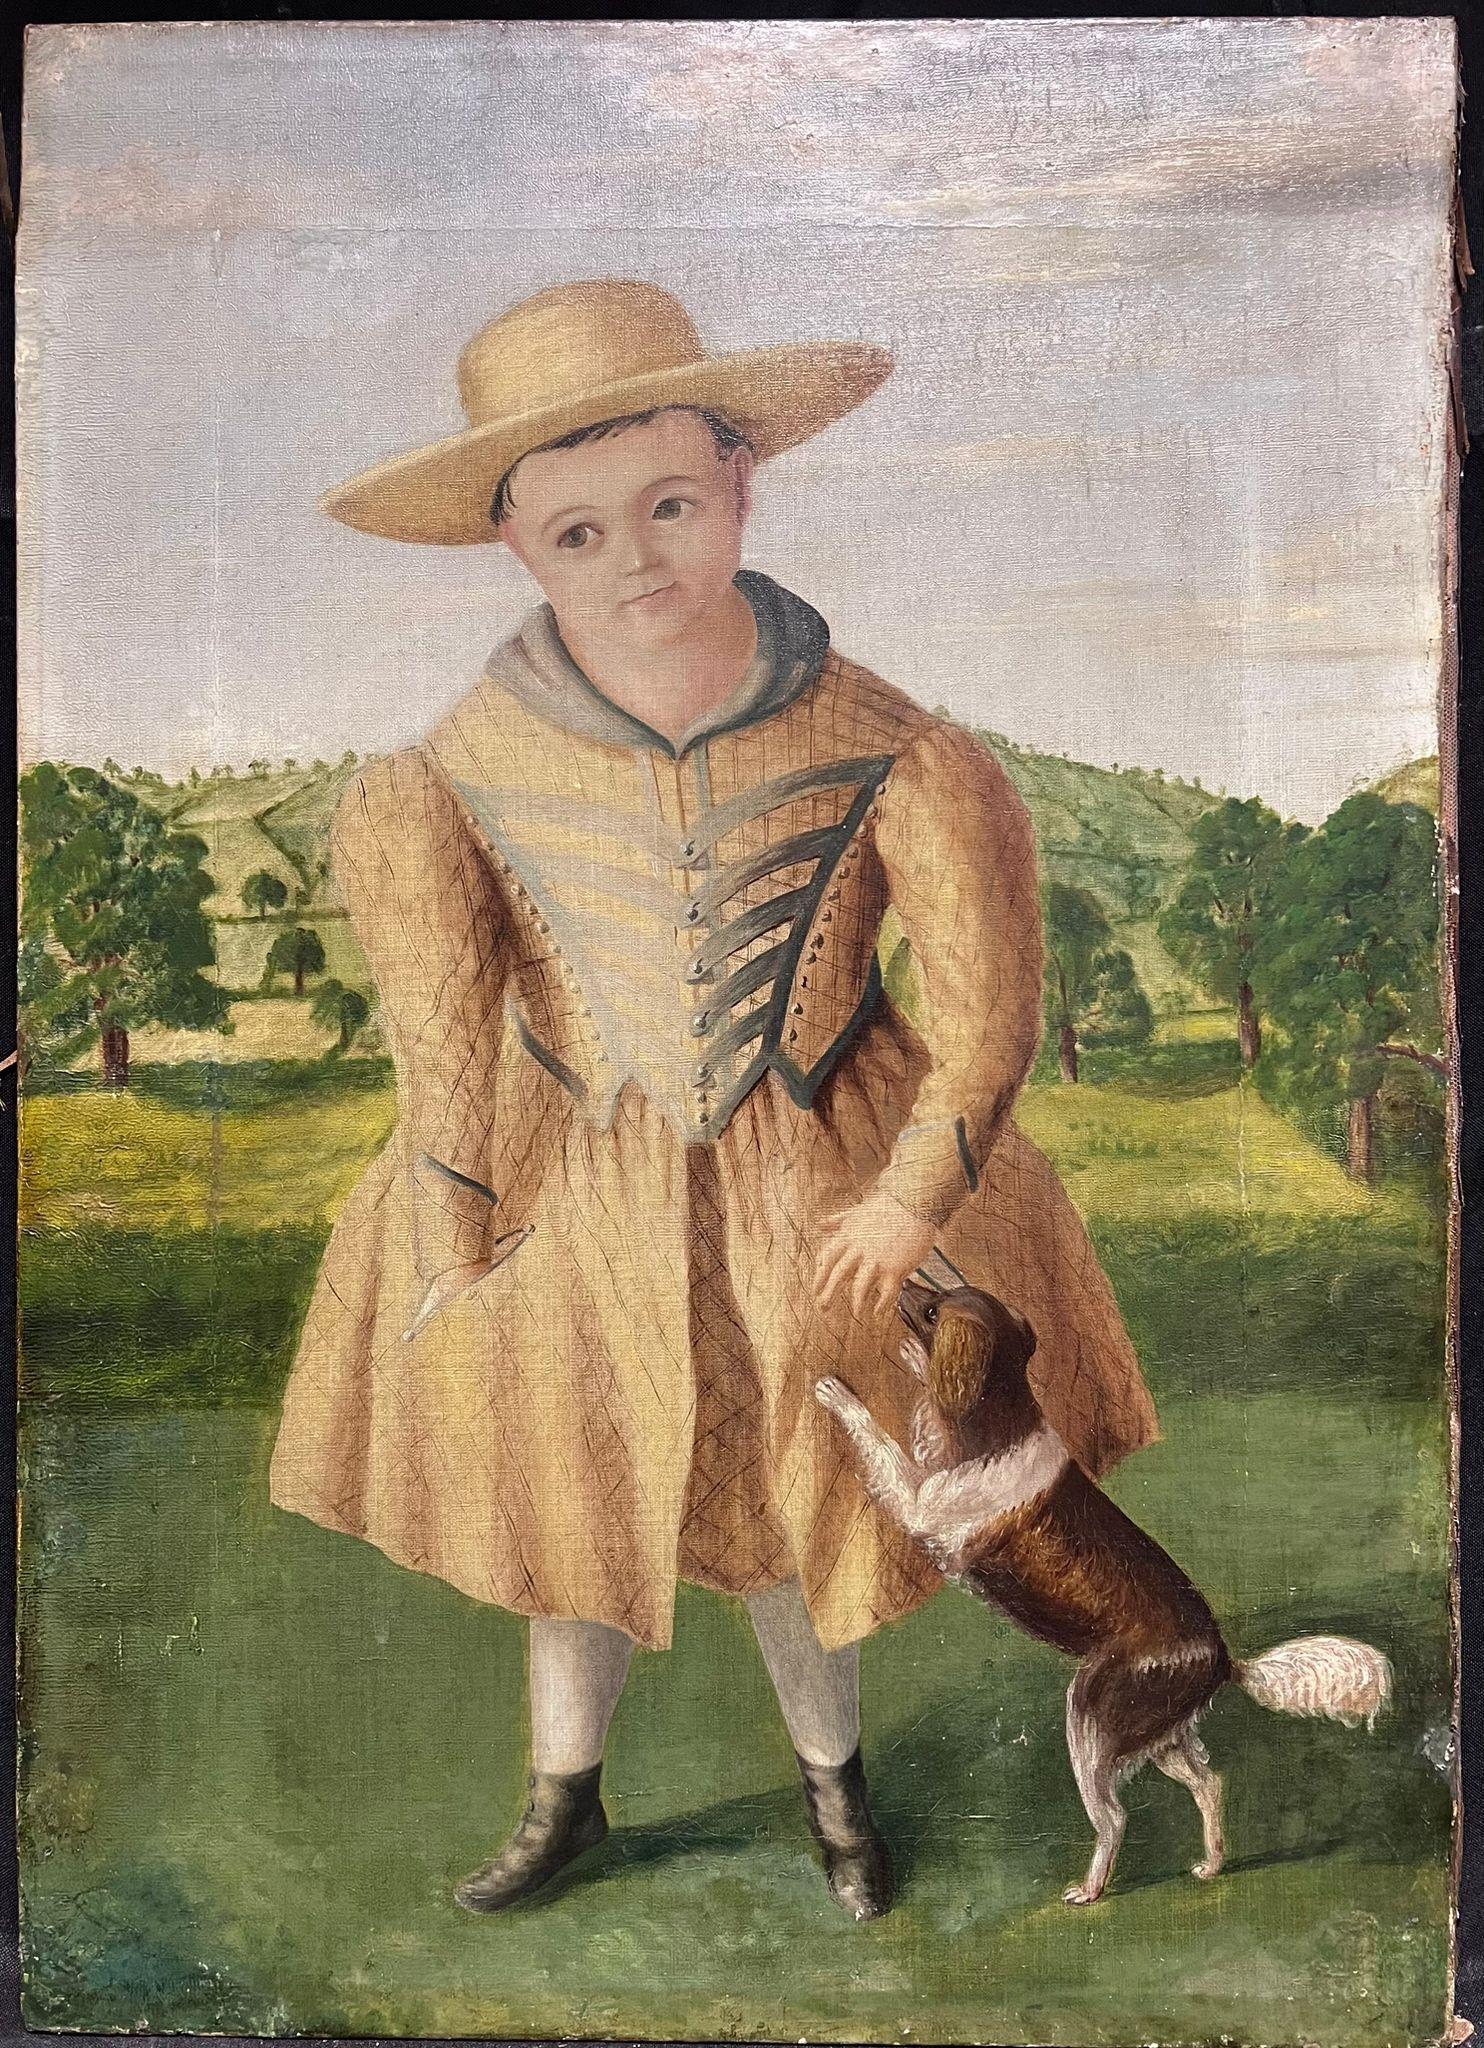 Mid 19th Century American Folk Art Portrait of Child with Dog in Landscape, Oil - Painting by 19th century American Folk Art